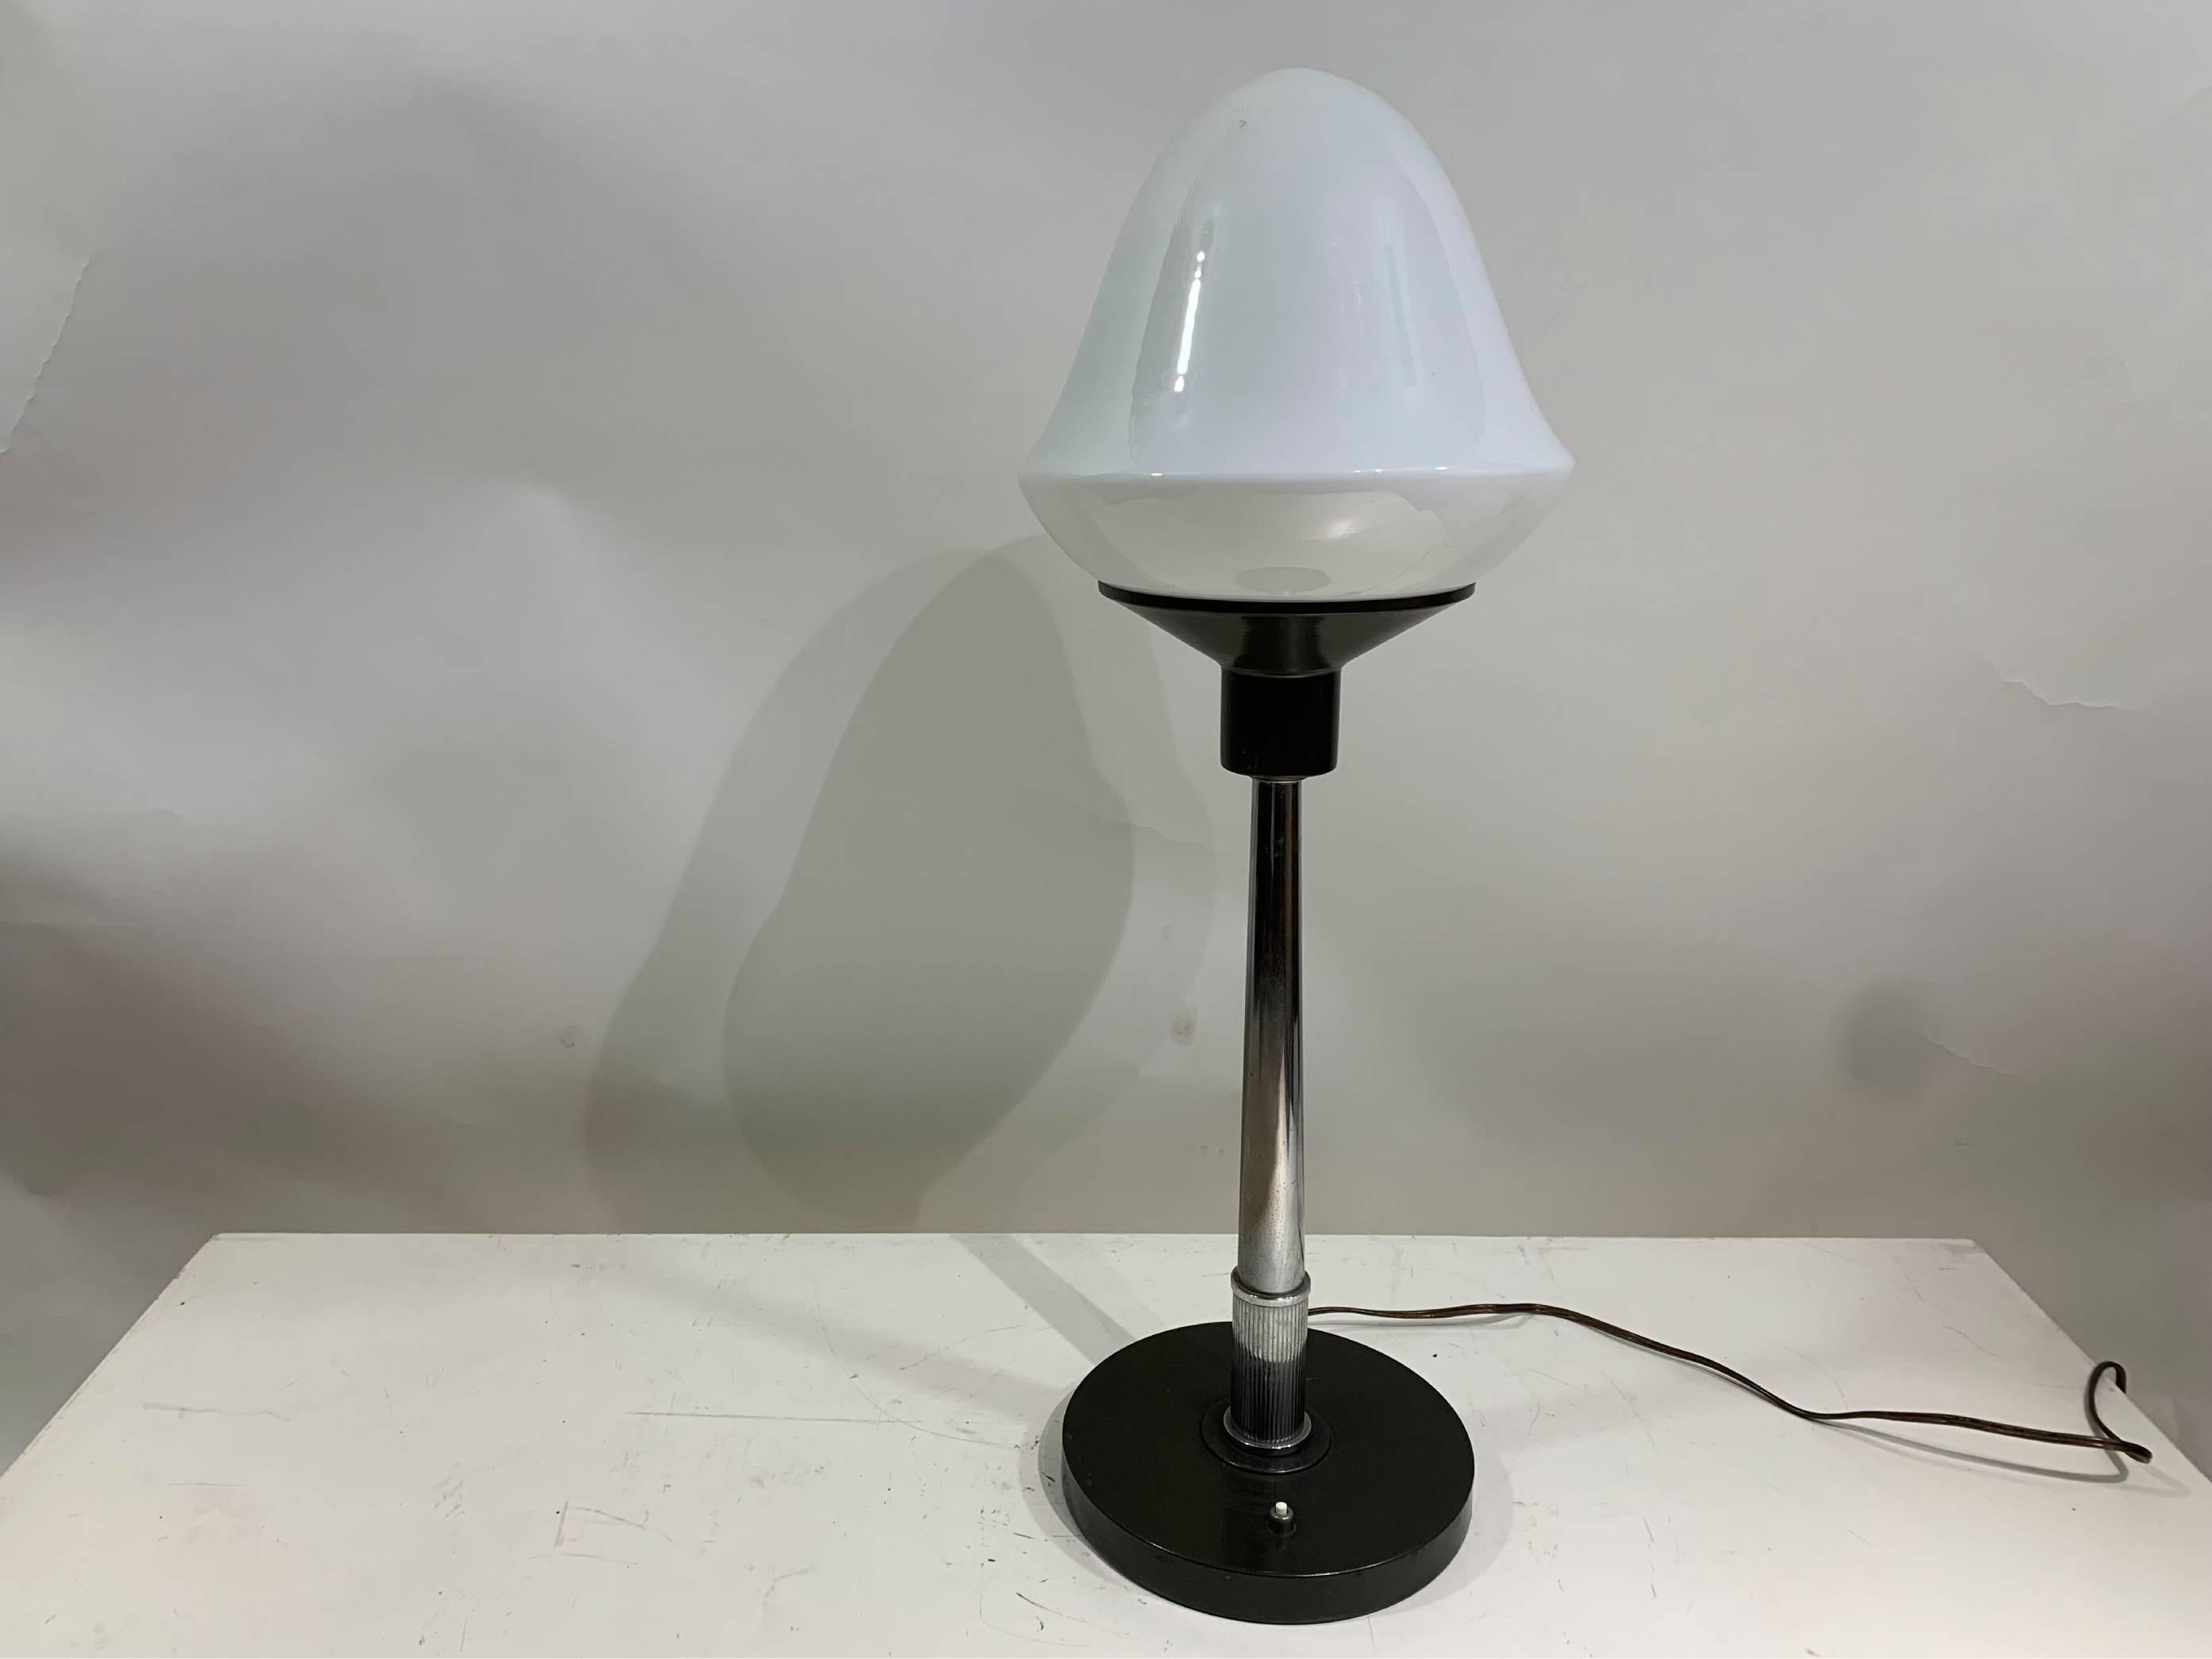 Discover the elegance and versatility of tjis stunning large table lamp, which stands impressively at 73 cm in height. This exquisite piece features a striking black base that supports a beautiful lamp shade crafted from milk glass. The design is